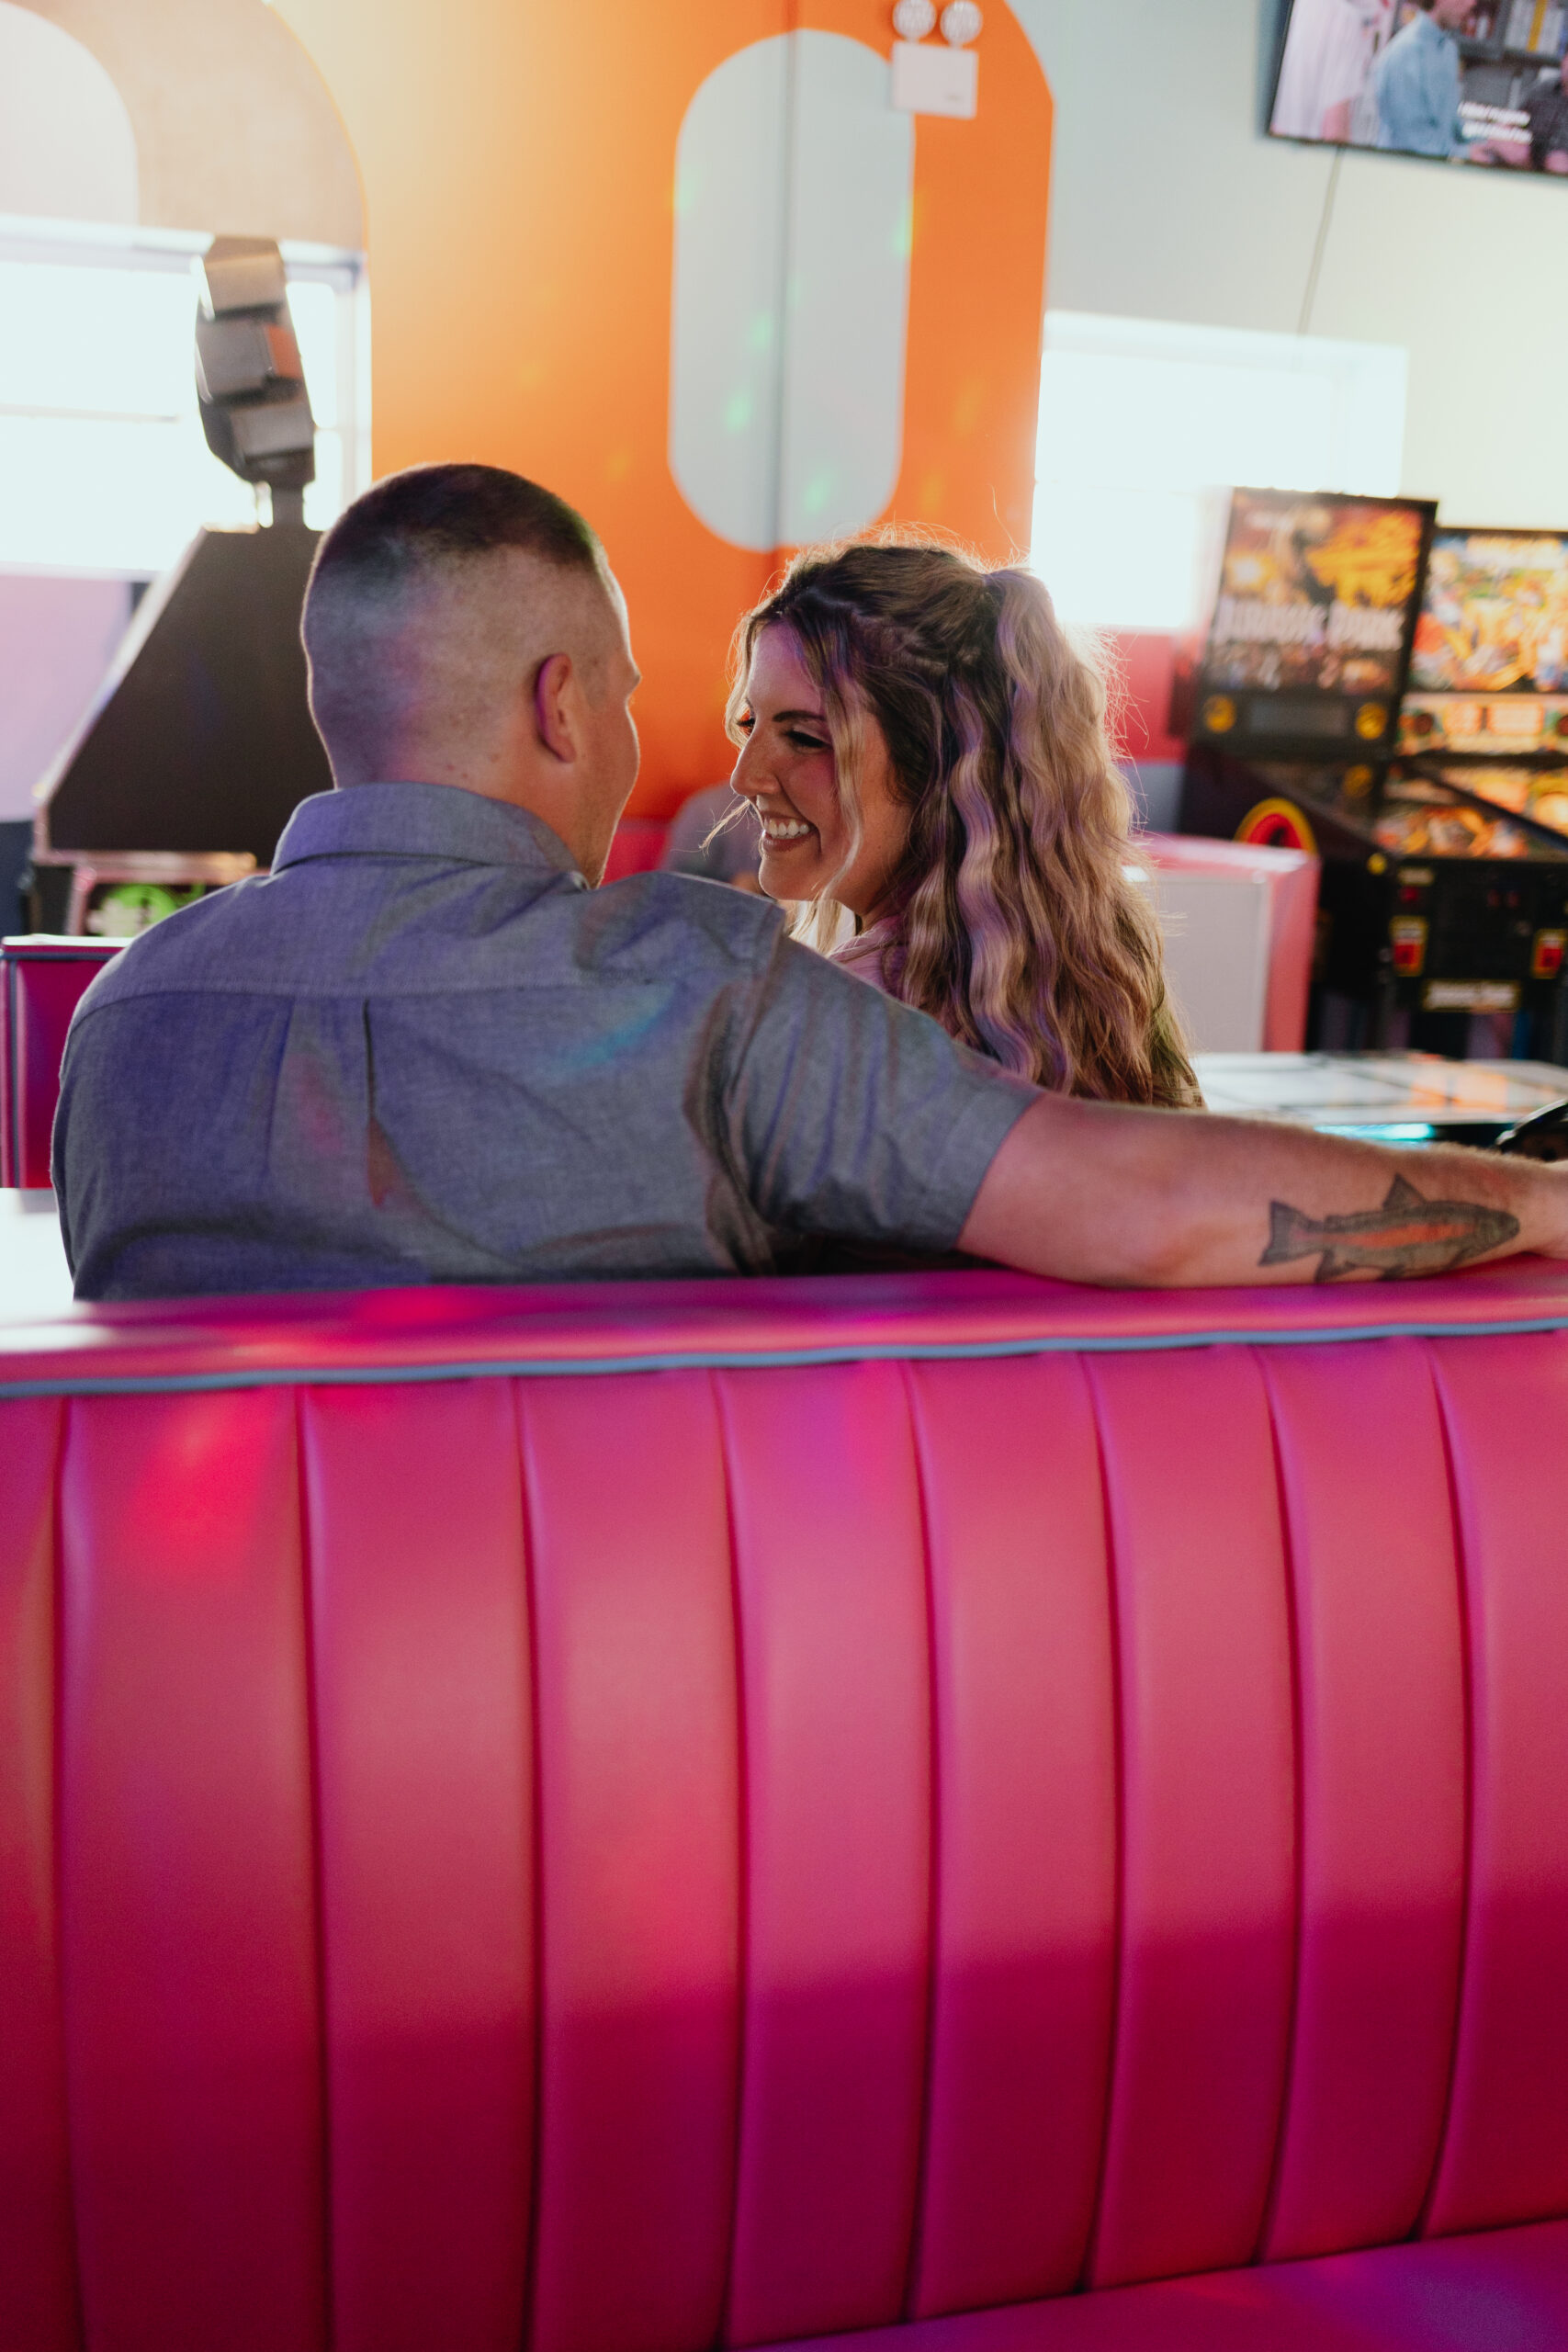 A couple shares a joyful moment together at a vibrant arcade bar, with the woman laughing as she looks at the man, seated in a classic red booth with a colorful, playful background setting the scene.